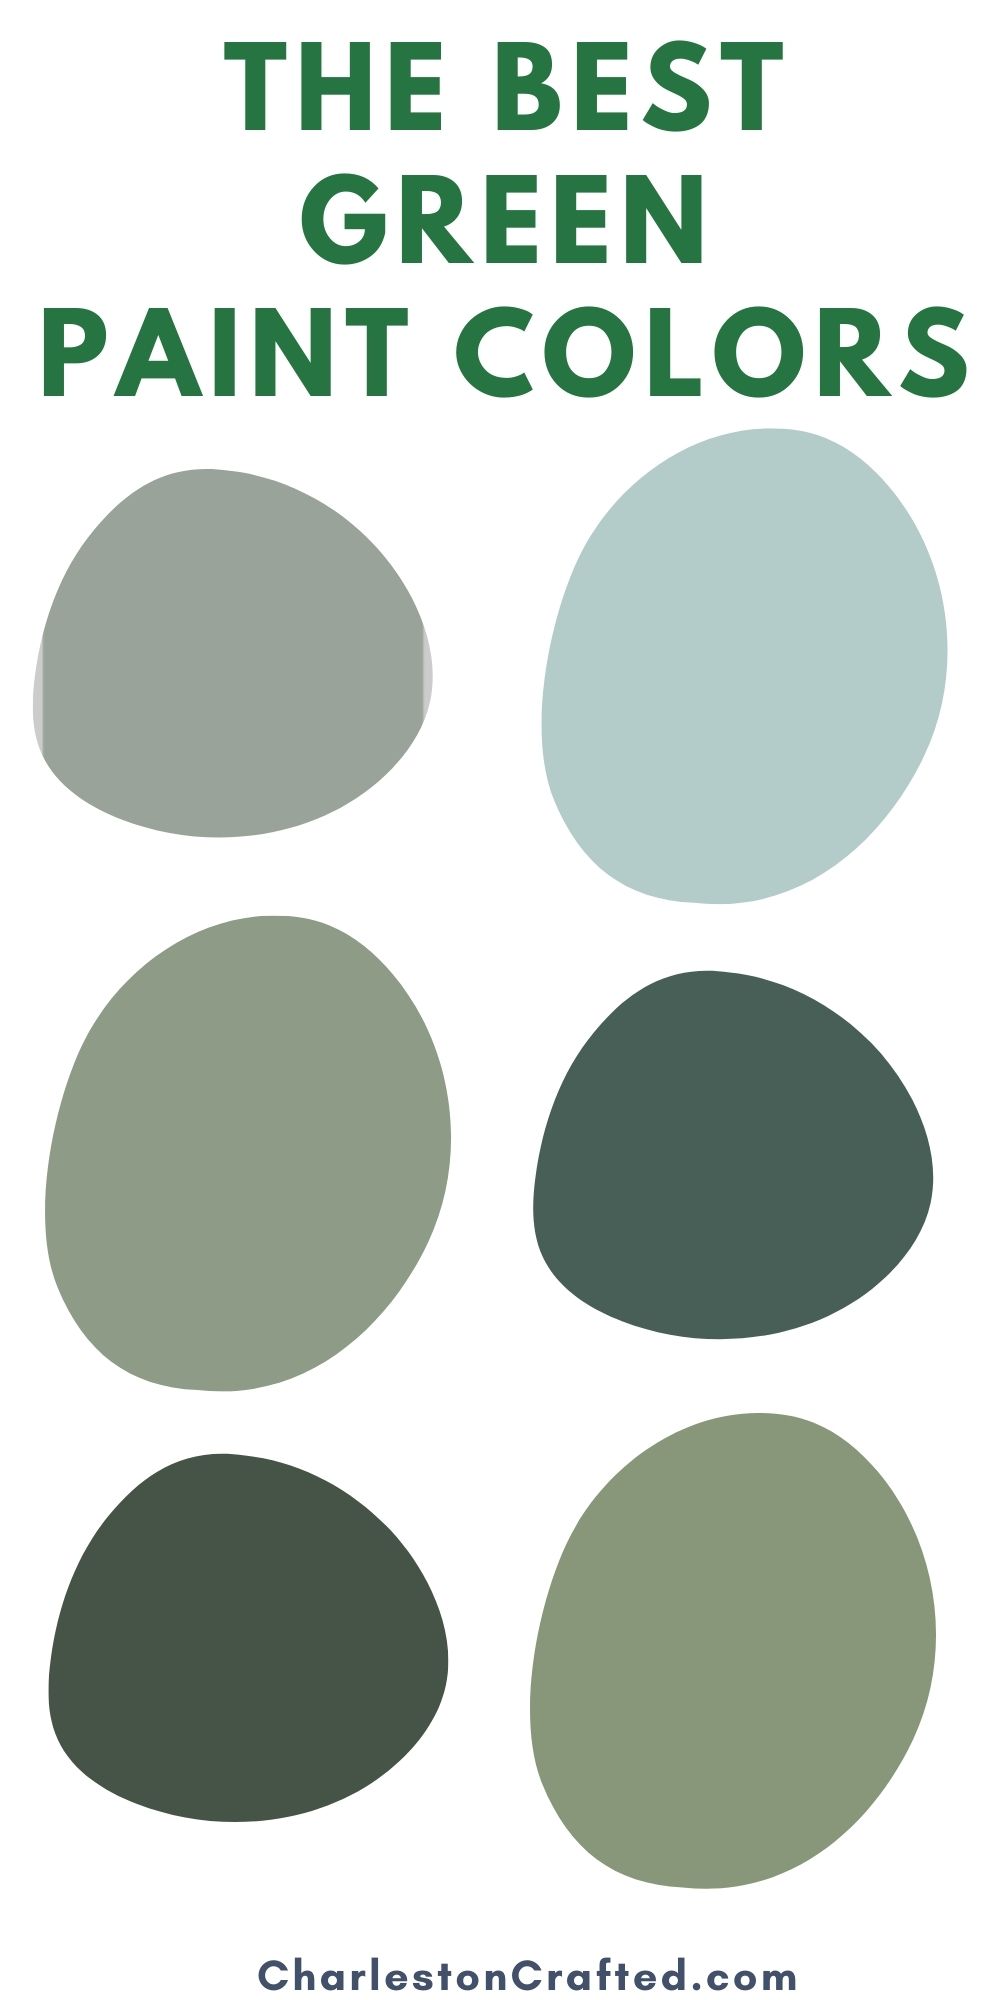 The best green paint colors for 25